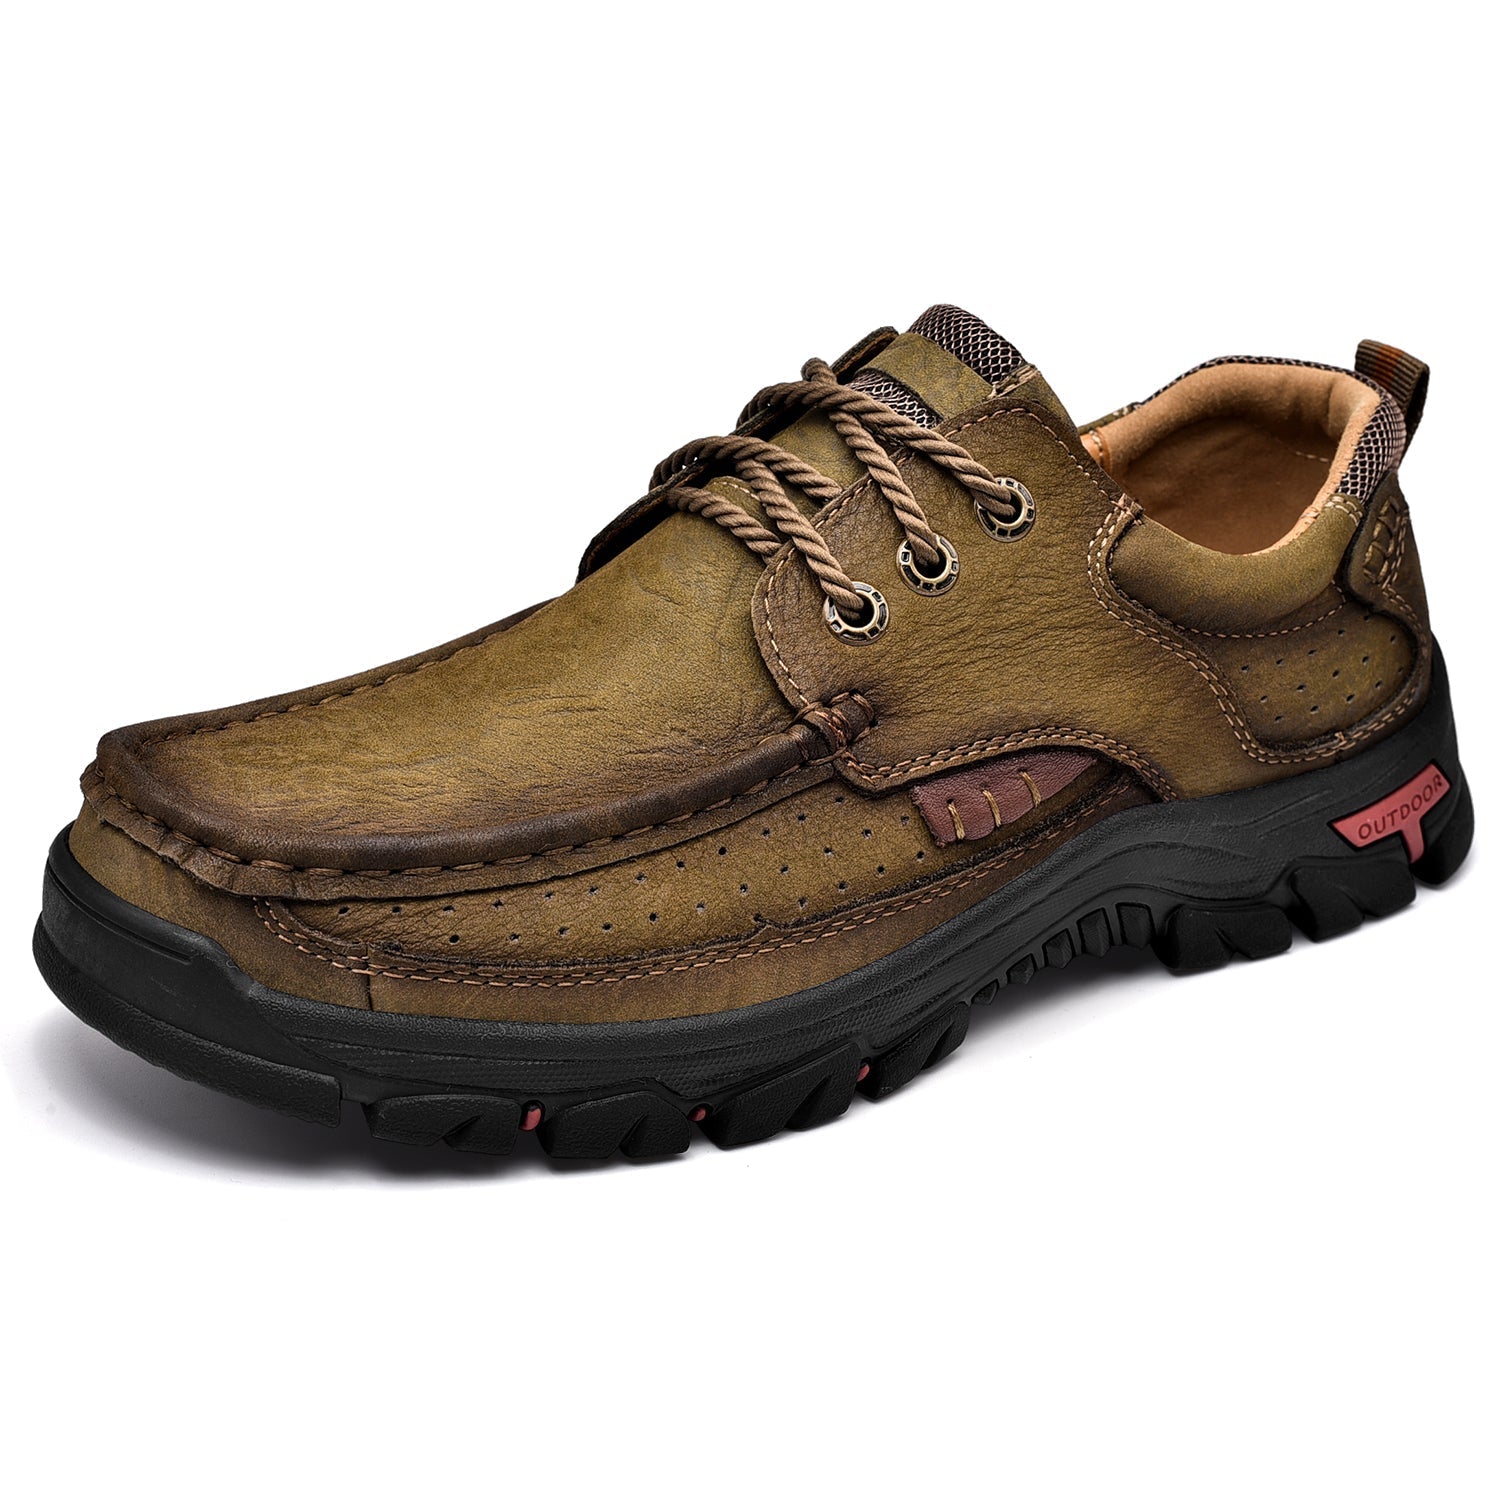 Mostelo With Laces - Transition boots with orthopedic and extremely comfortable sole